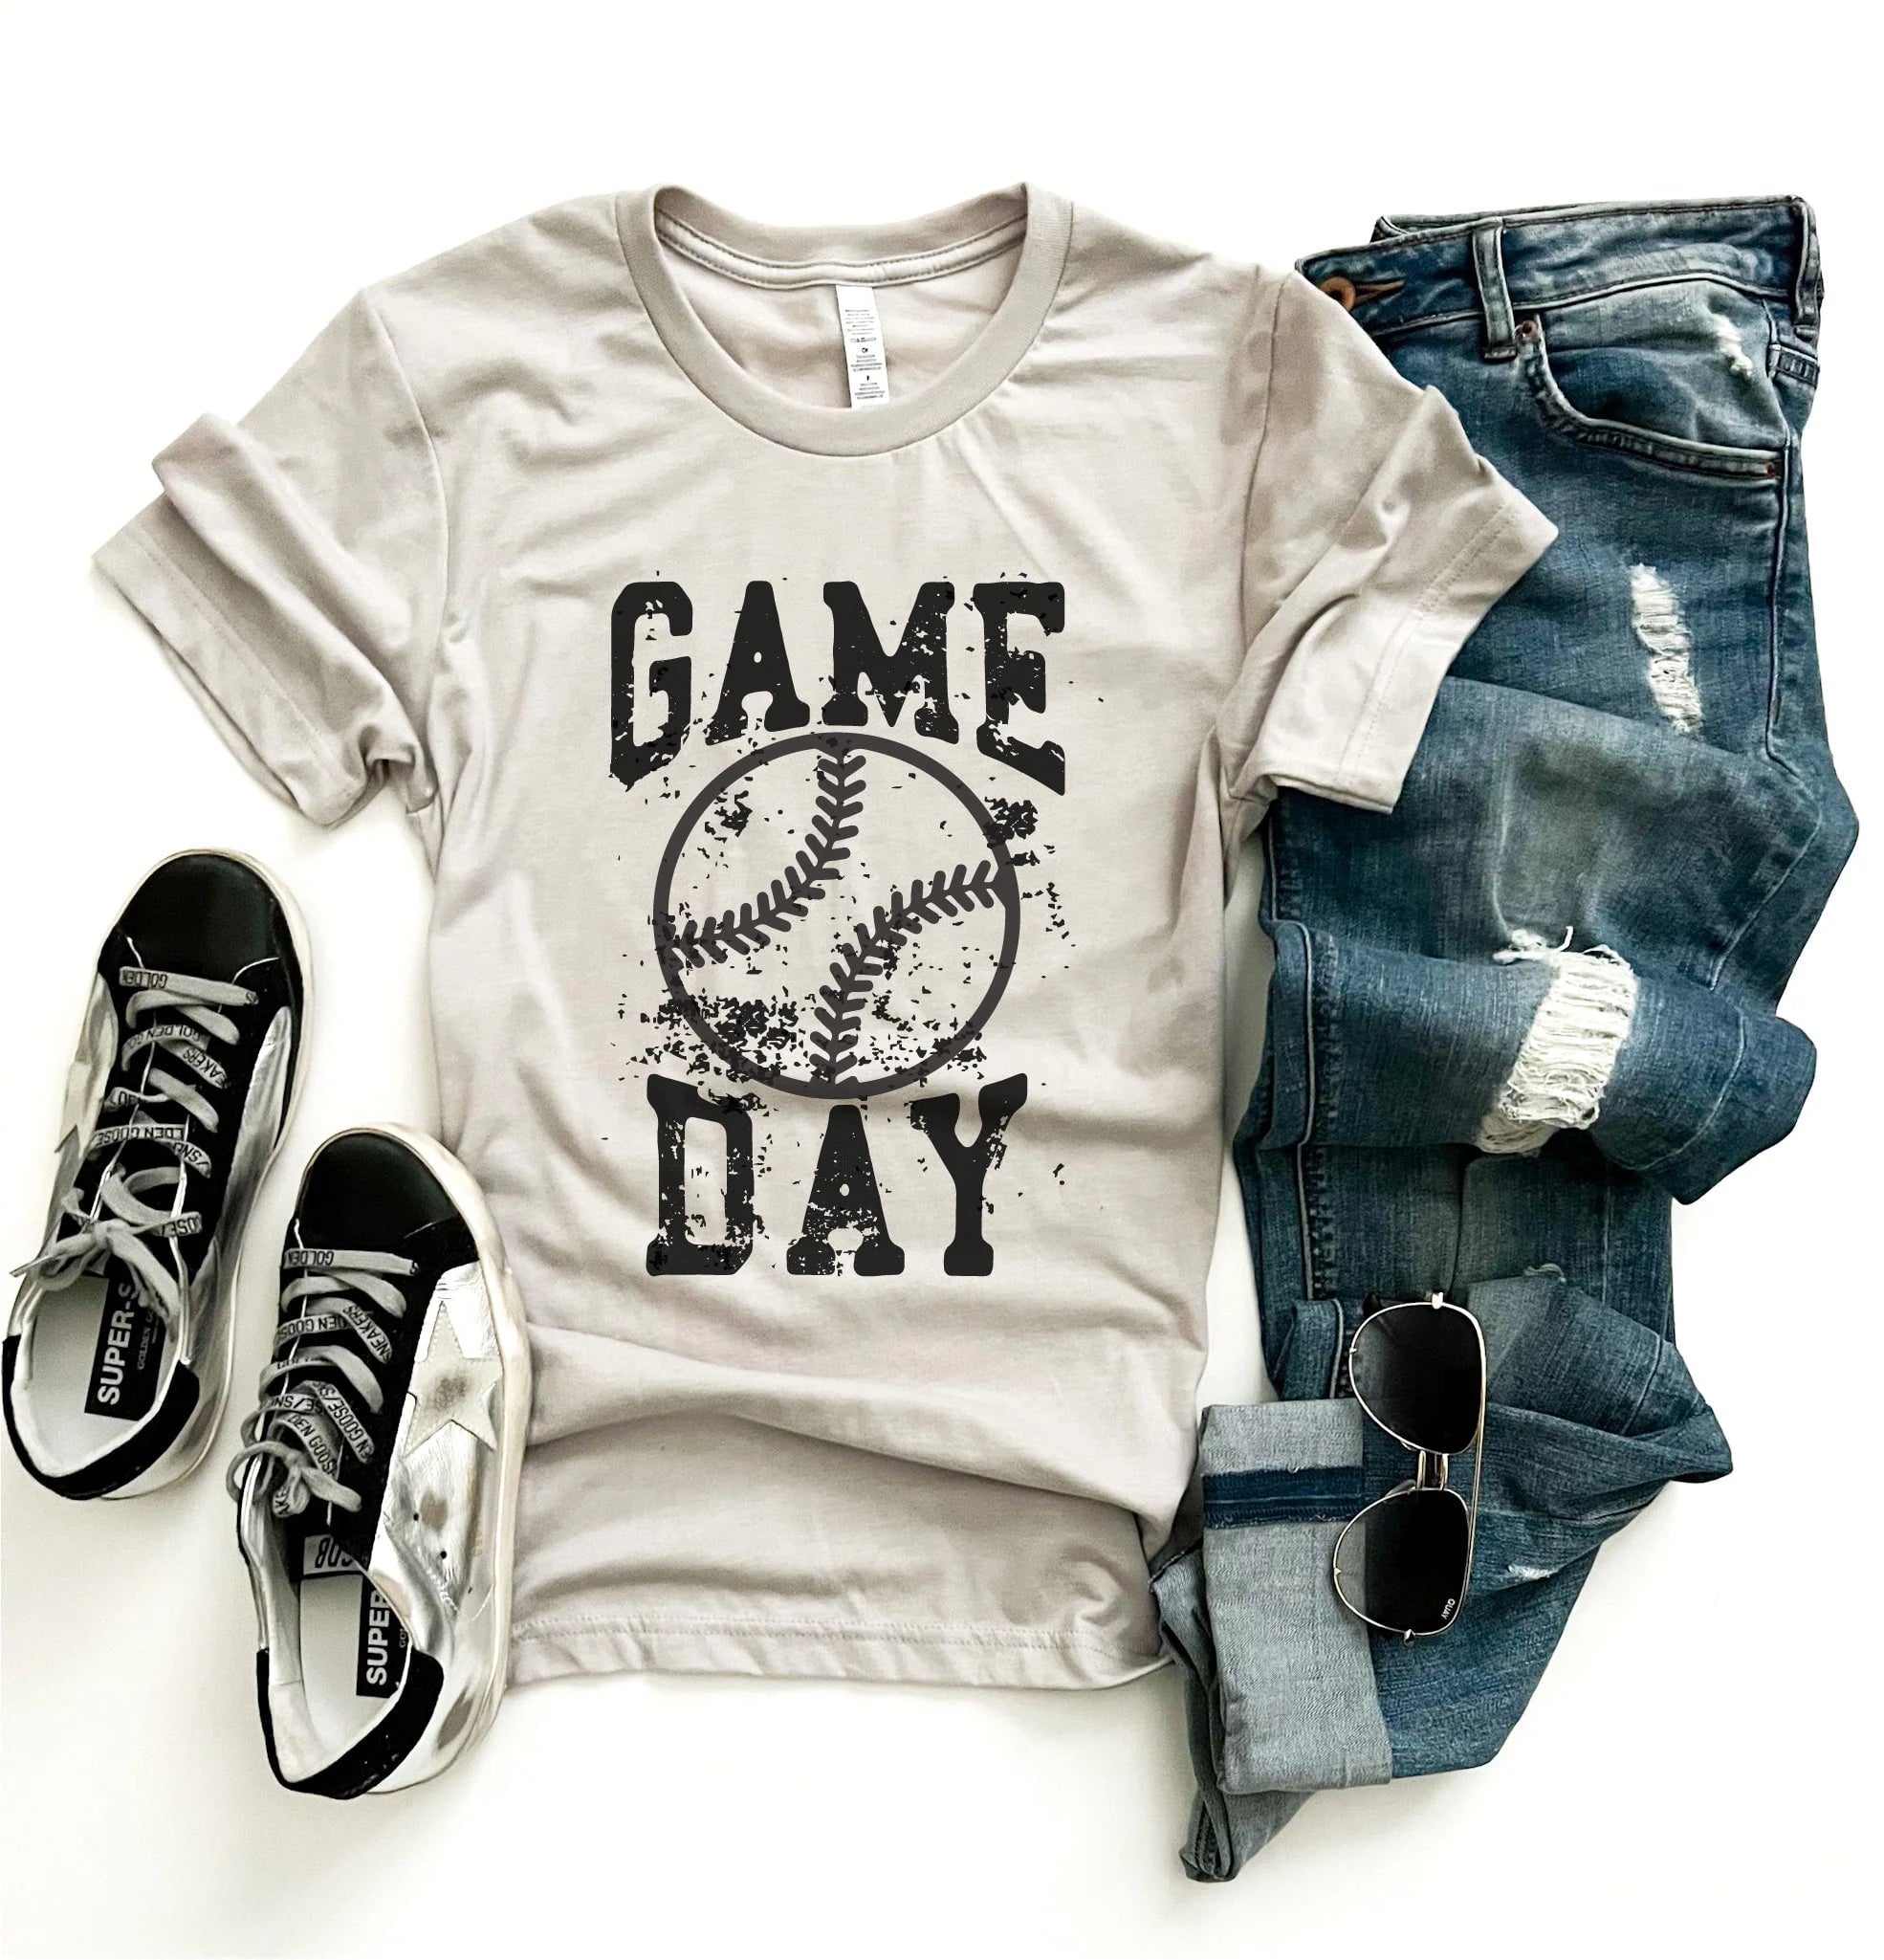 Game Day Distressed Tee - PREORDER - FINAL SALE